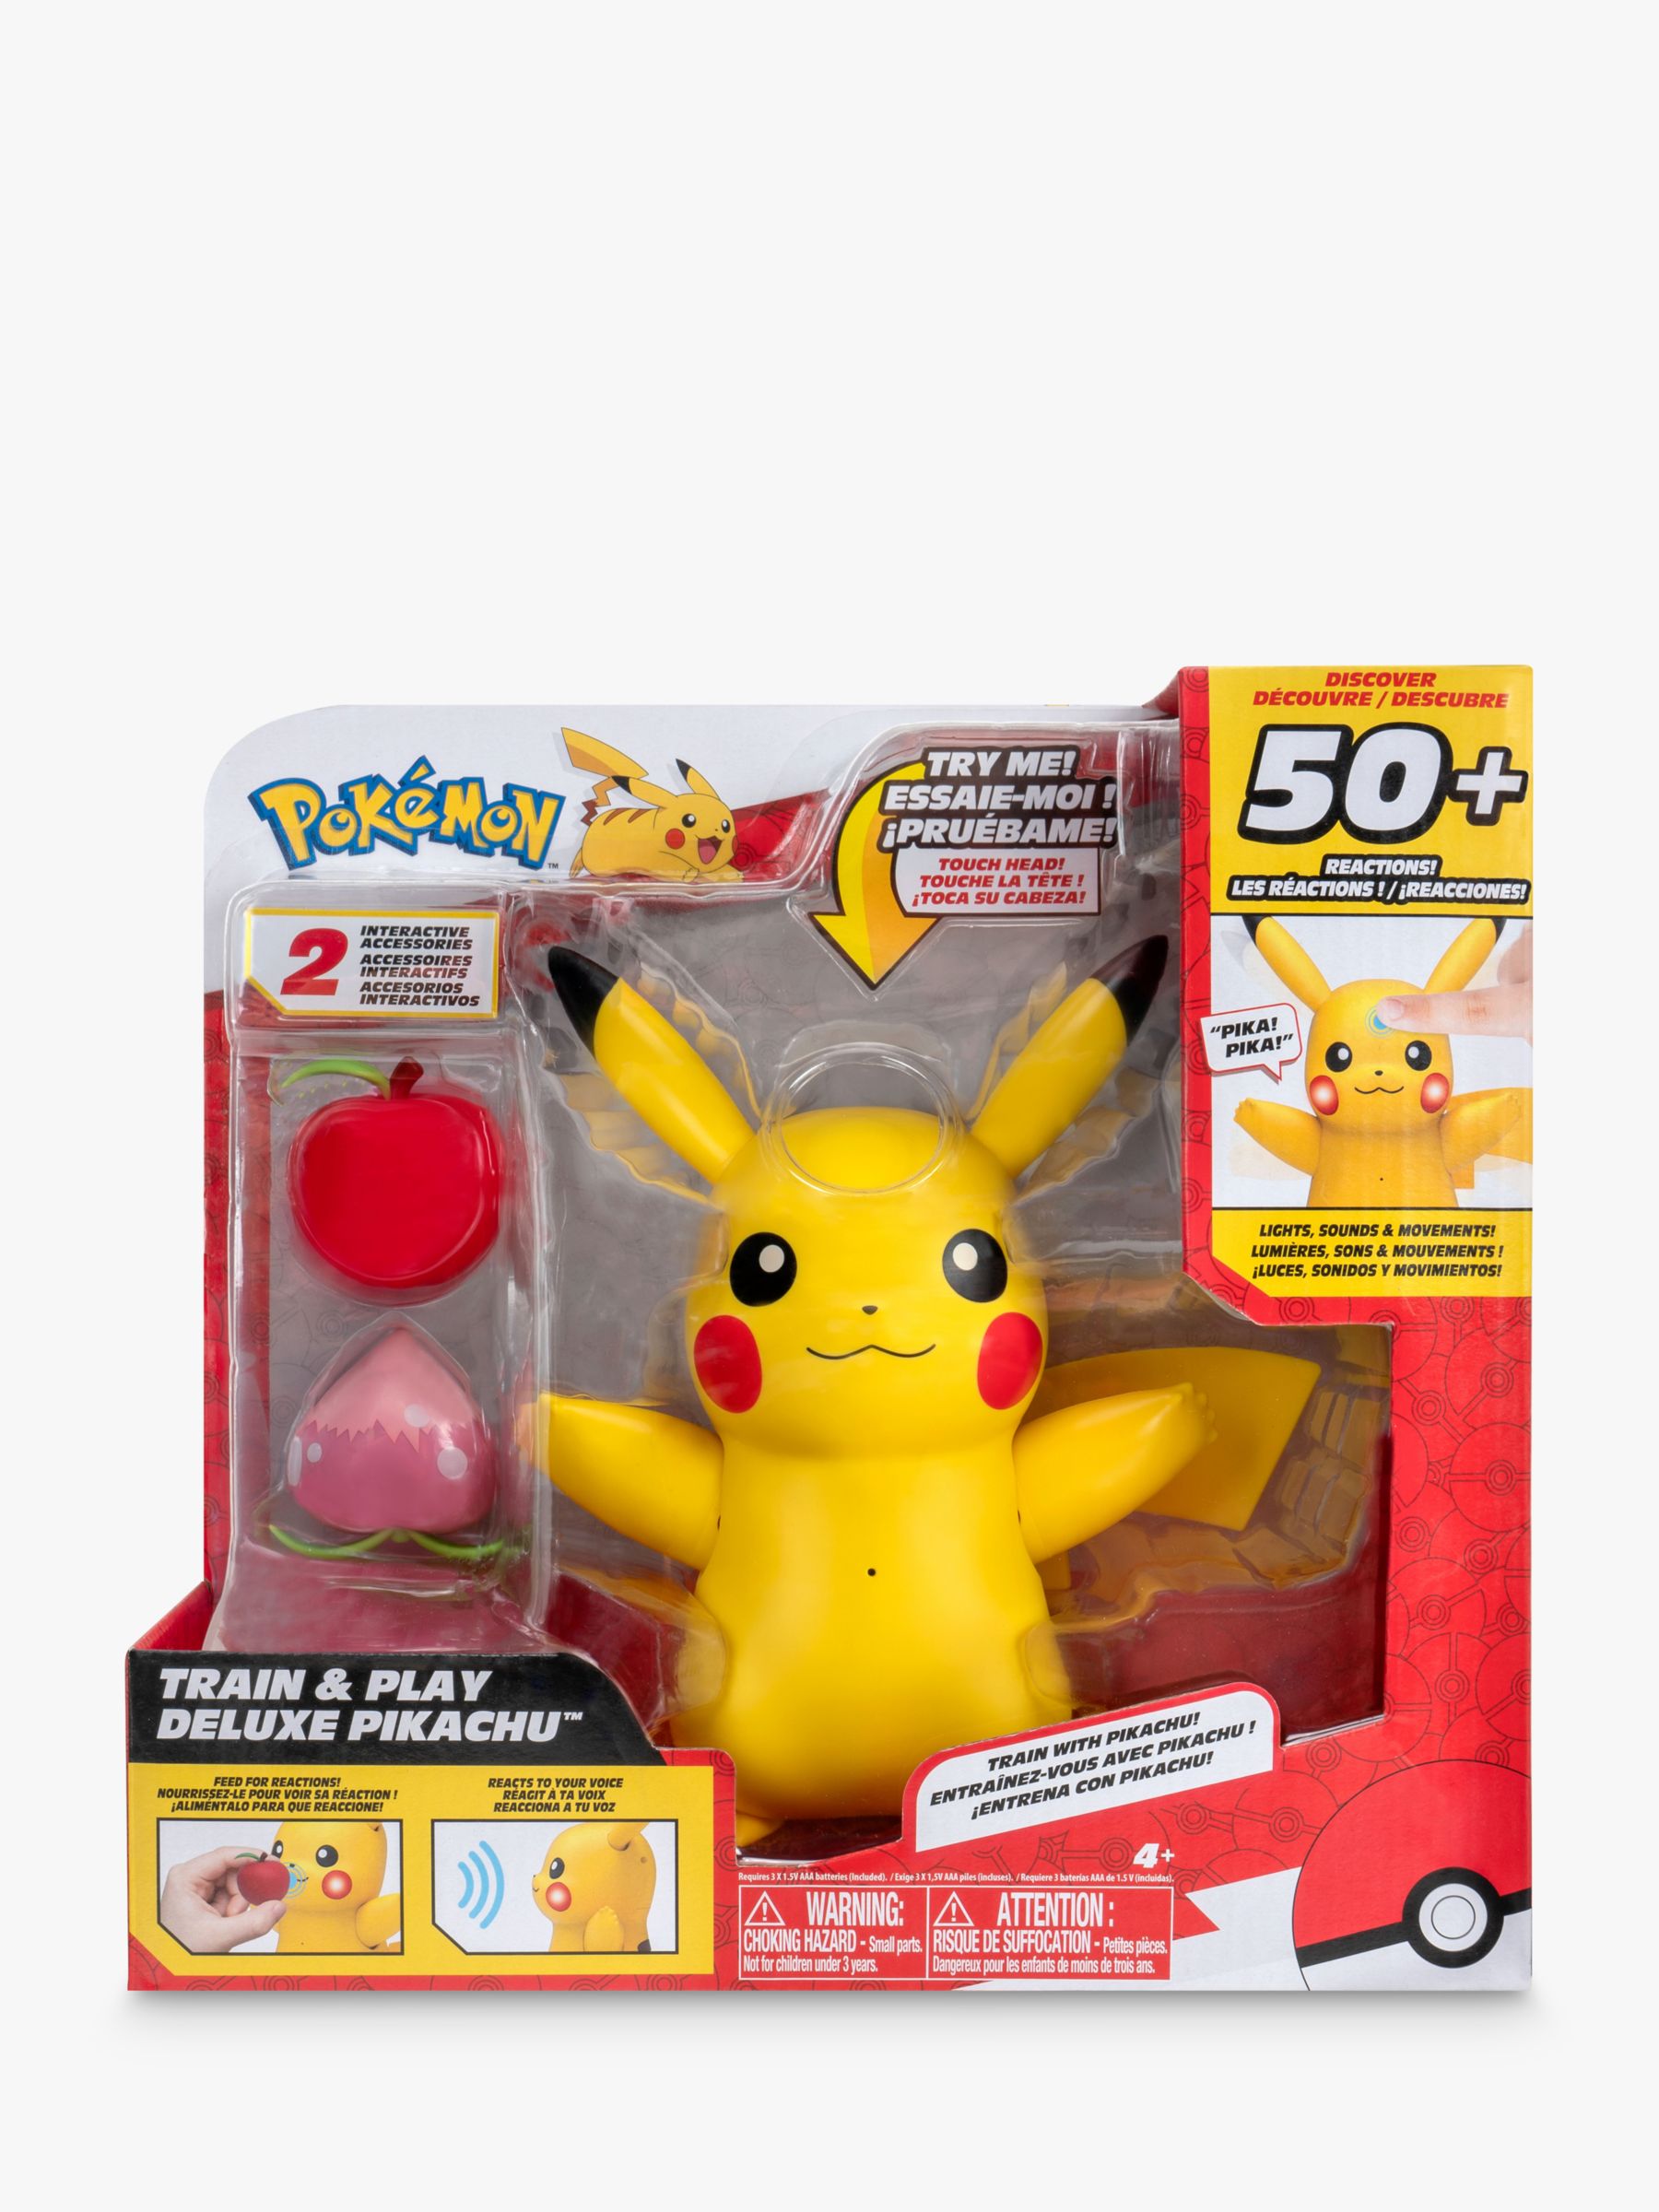 Pokemon Train and Play Deluxe Pikachu - 4.5-Inch Pikachu Figure with  Lights, Sounds, and Moving Limbs Plus Interactive Accessories